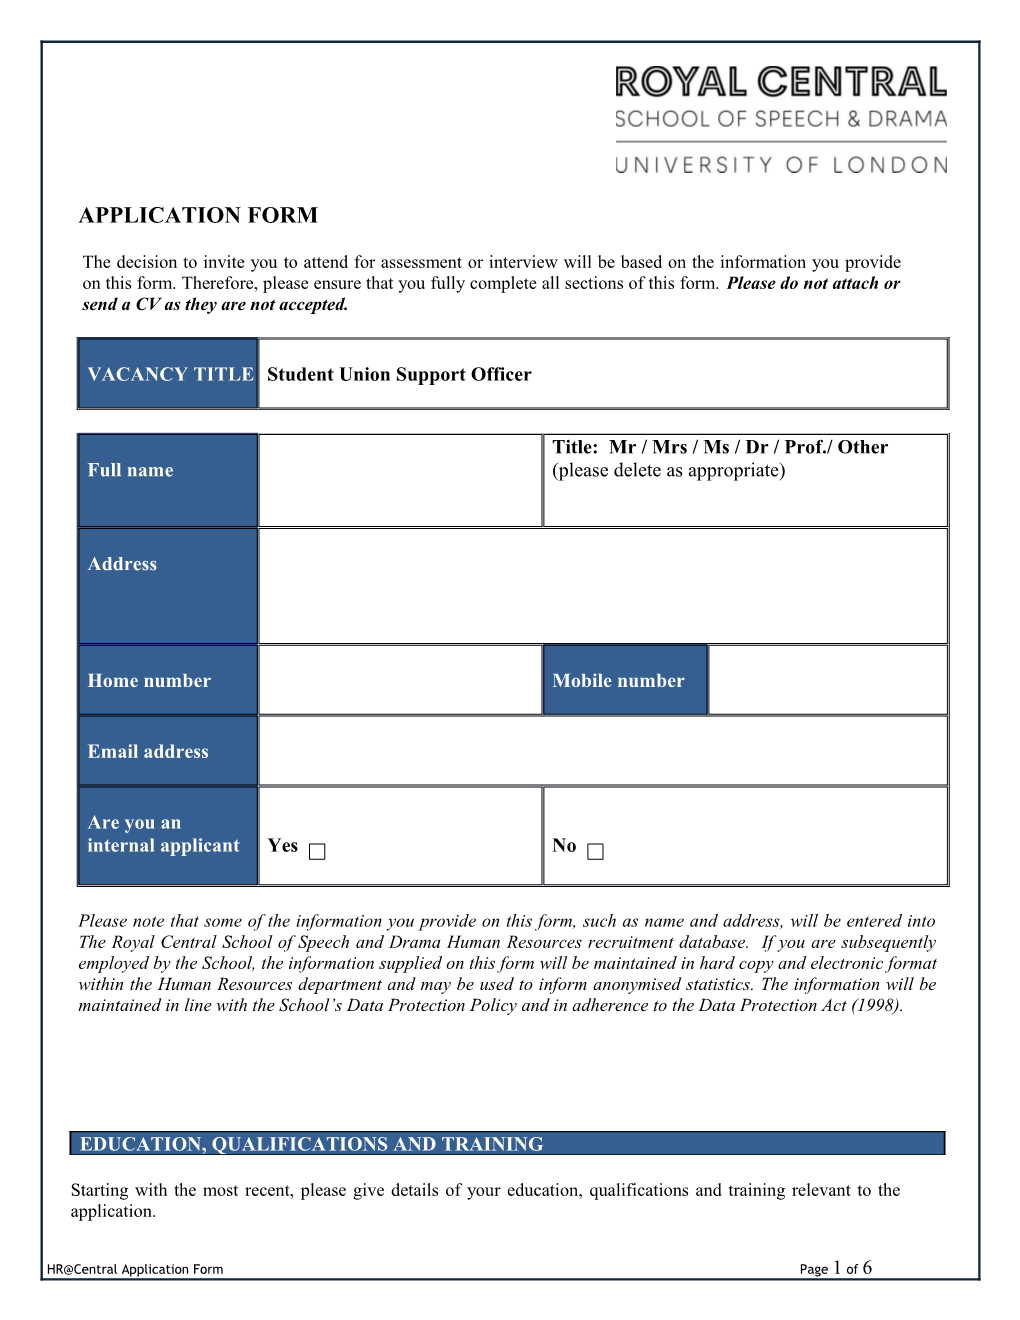 Application Form s62